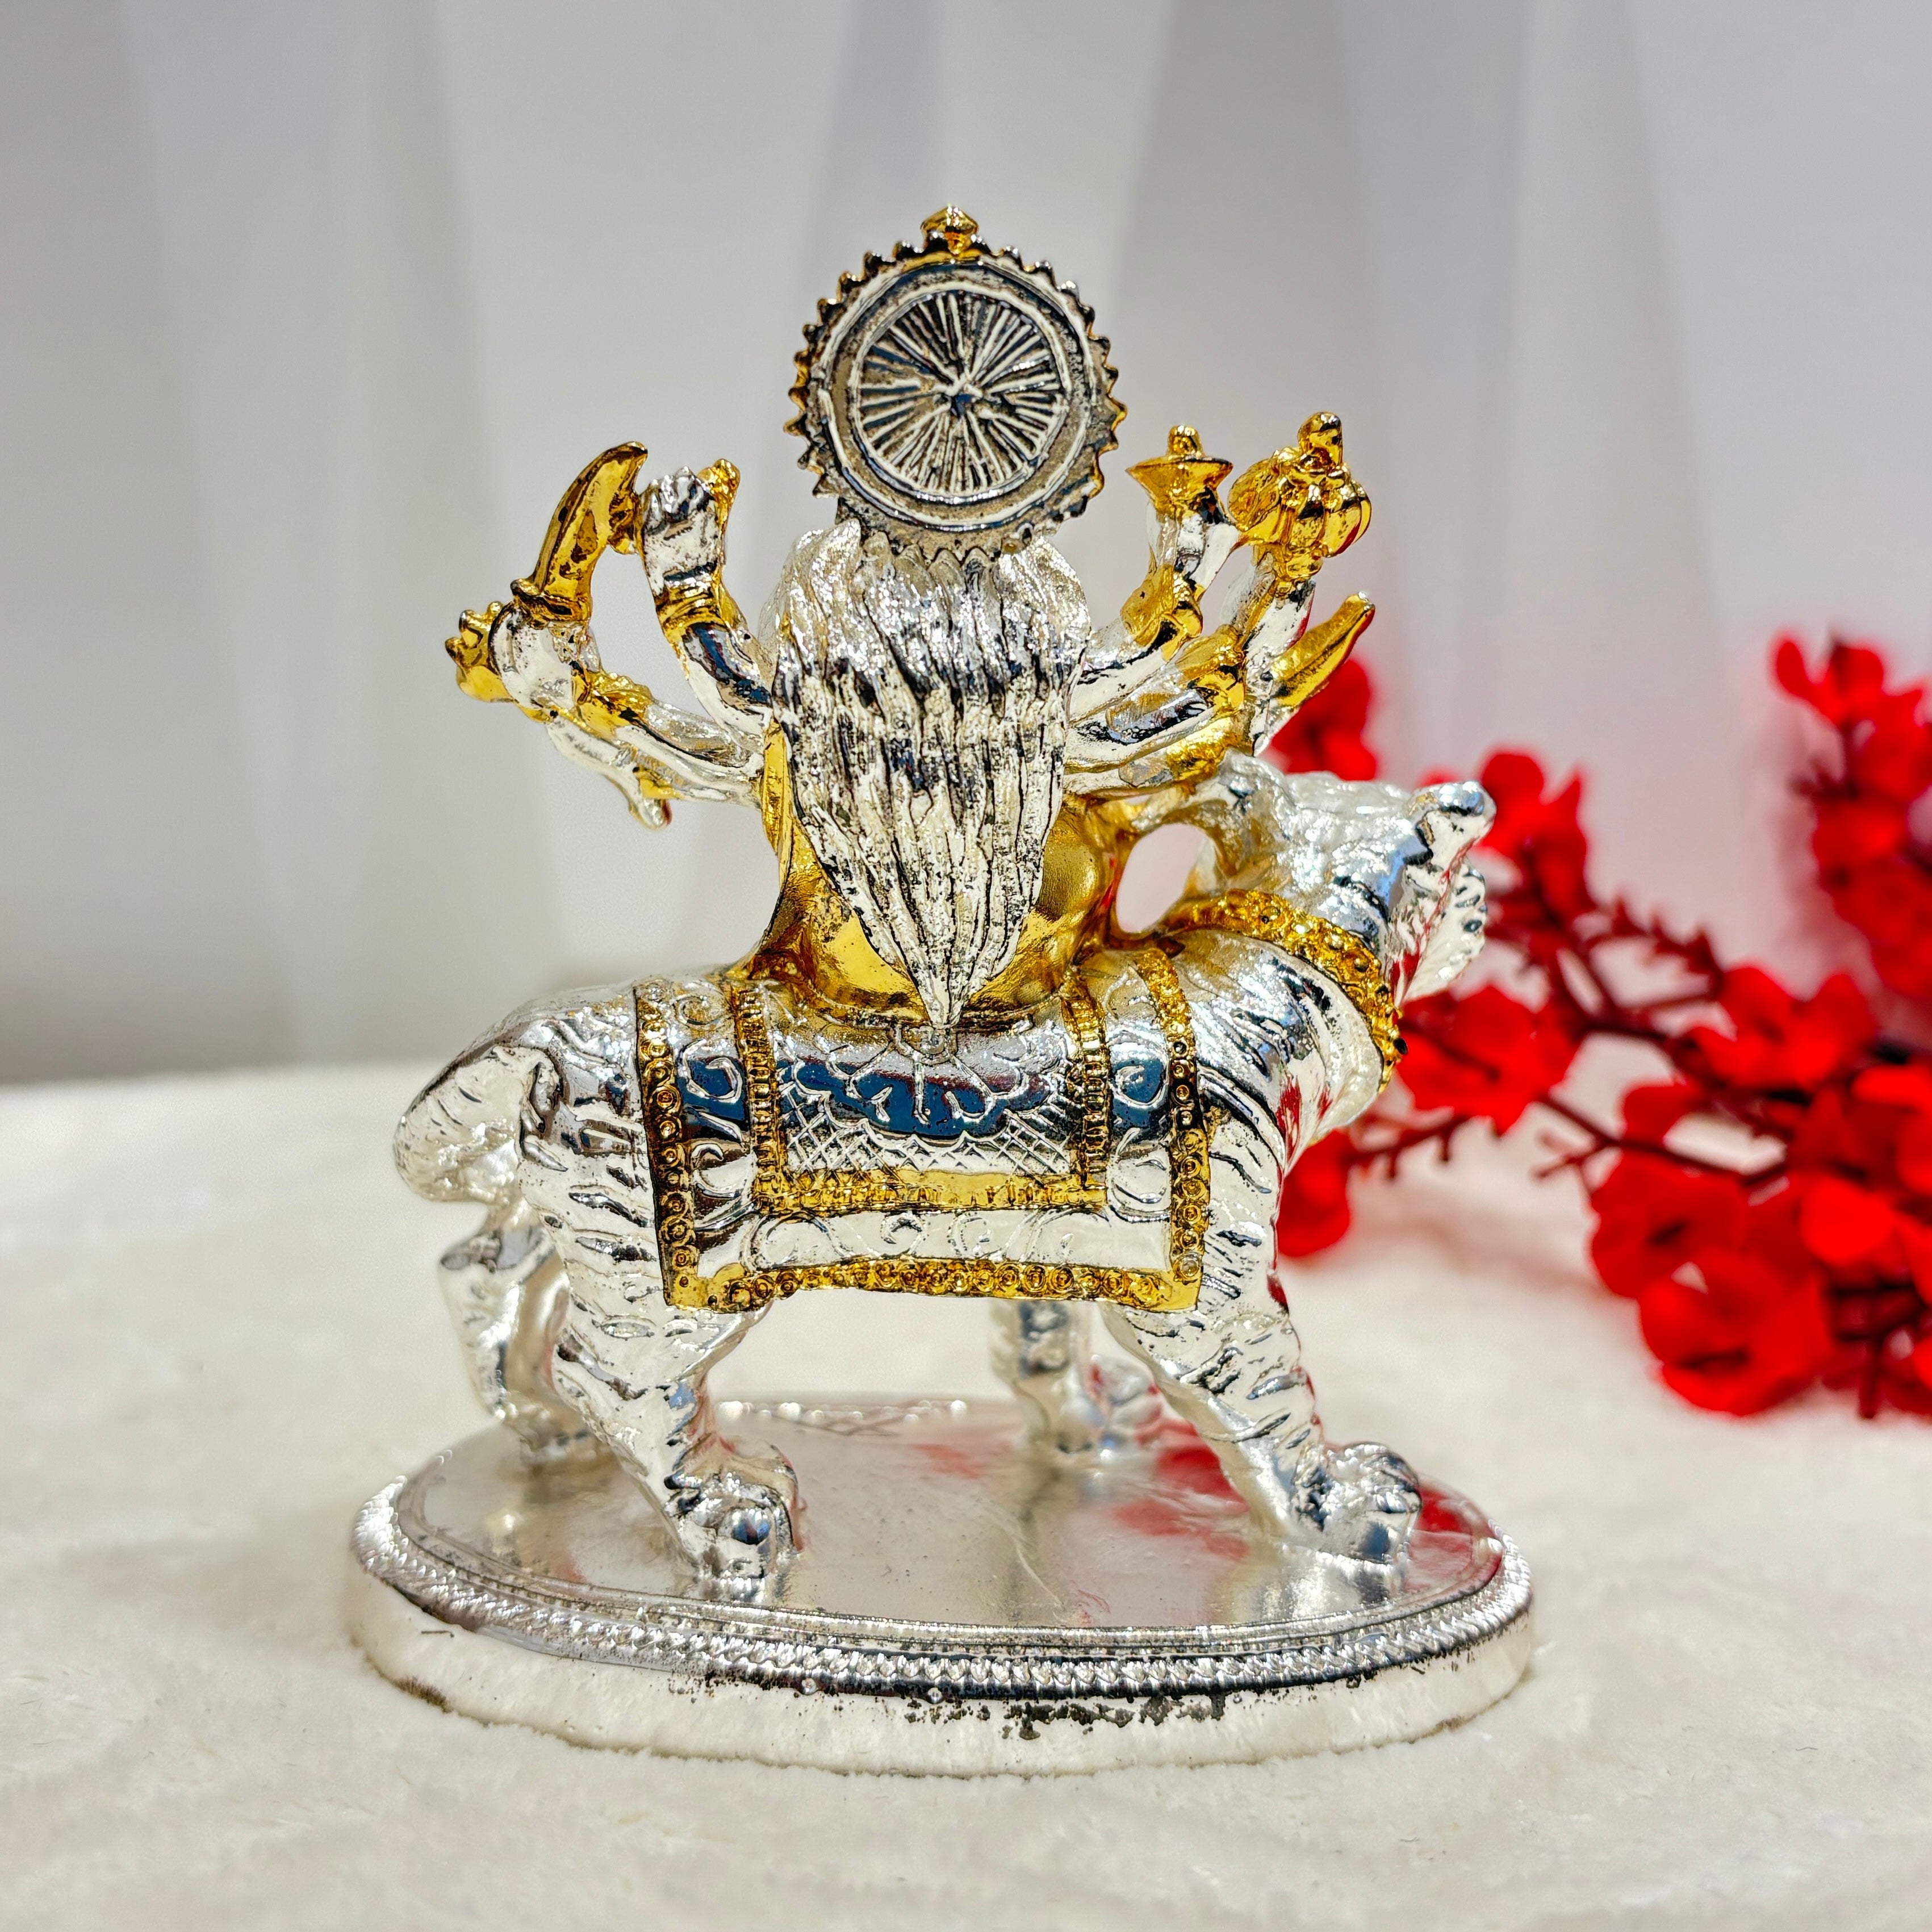 This 999 Gold Coated Durga Mata Idol will bring blessings and prosperity to your home. The intricately designed idol is coated in 999 gold, adding a touch of elegance to your household. Bring home this divine statue and invite good fortune into your life!